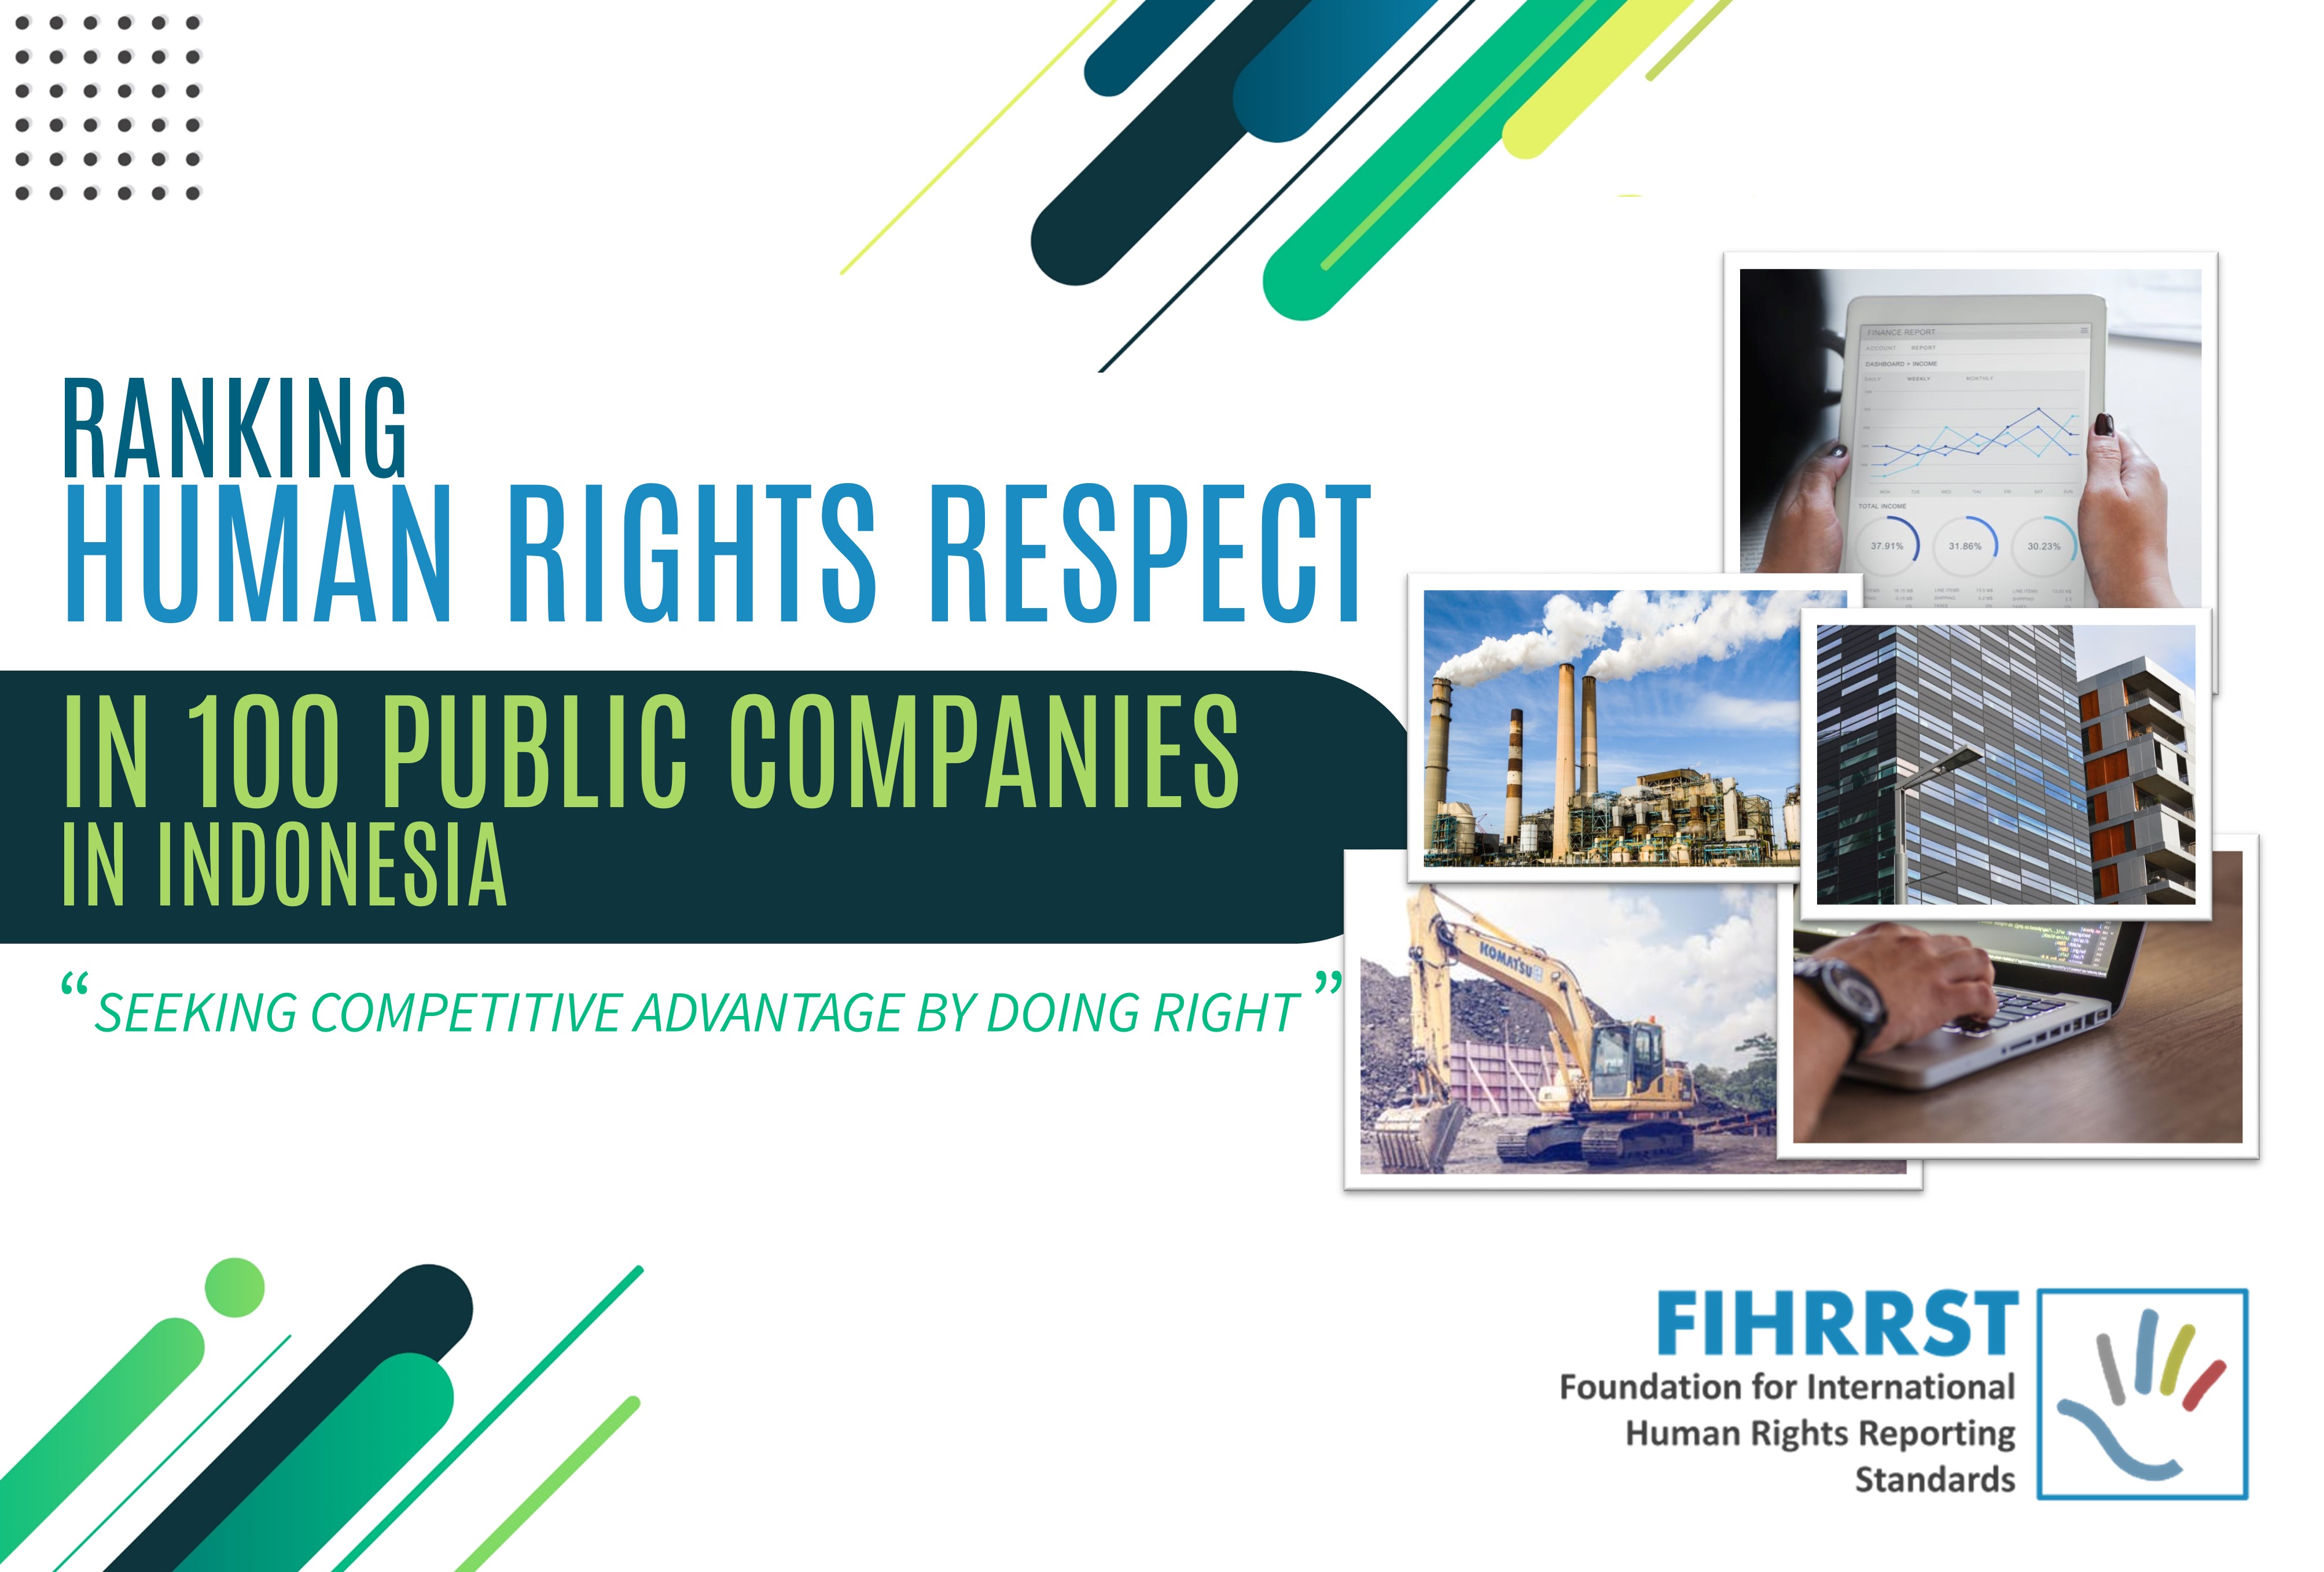 RANKING HUMAN RIGHTS RESPECT IN 100 PUBLIC COMPANIES IN INDONESIA